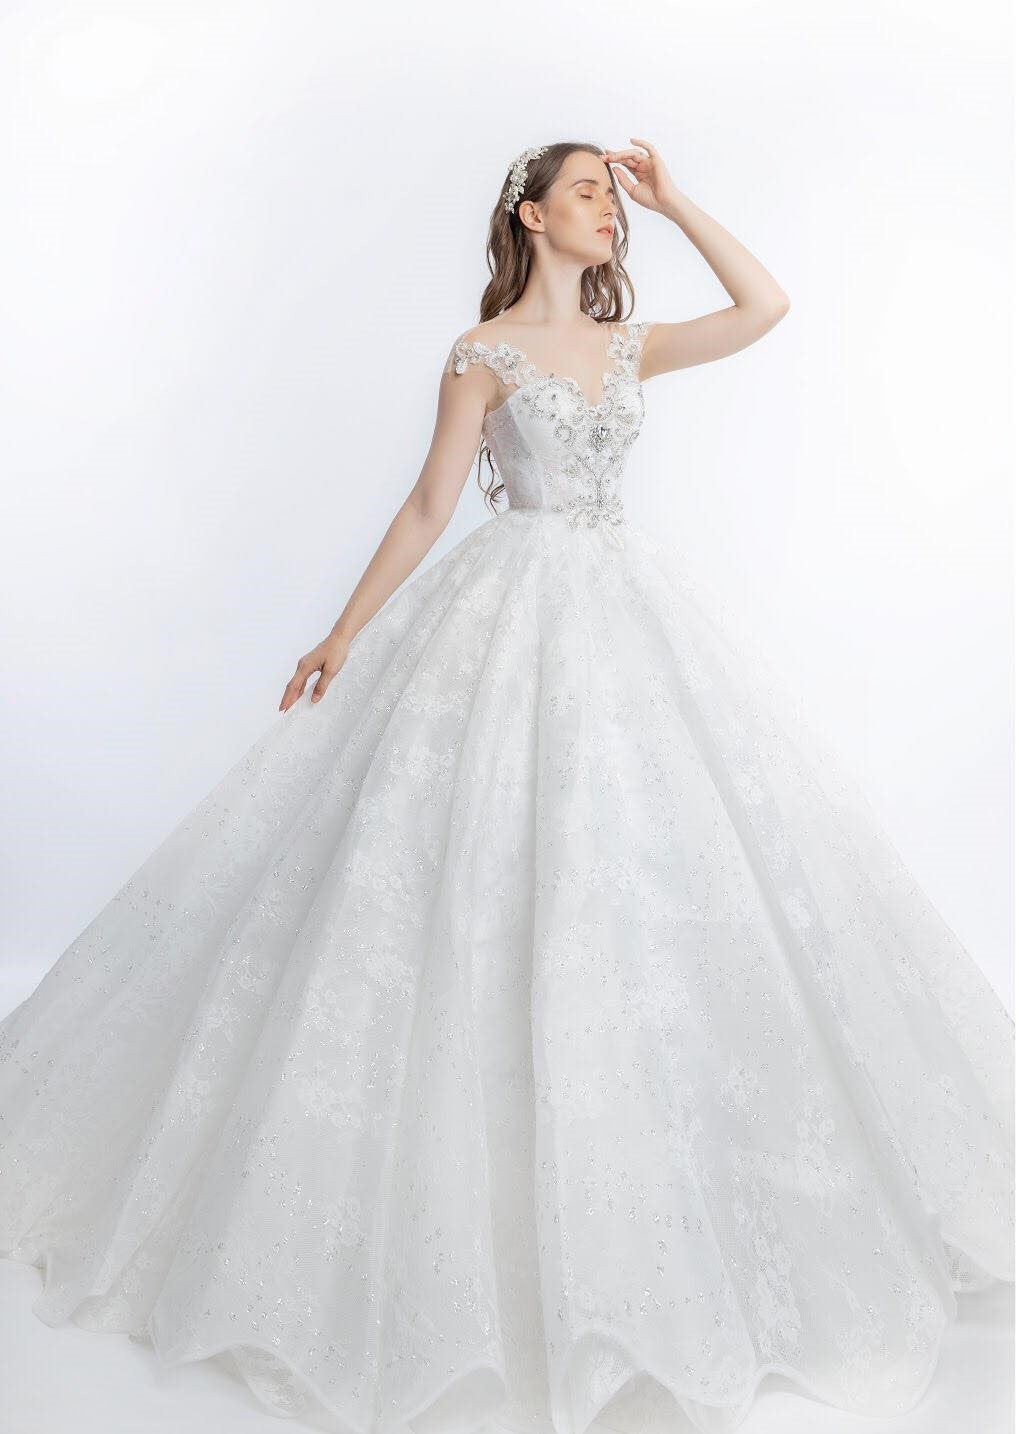 Modern Princess Ball Gown Wedding Dress: Sparkling A-line with Off-Shoulder Sleeves